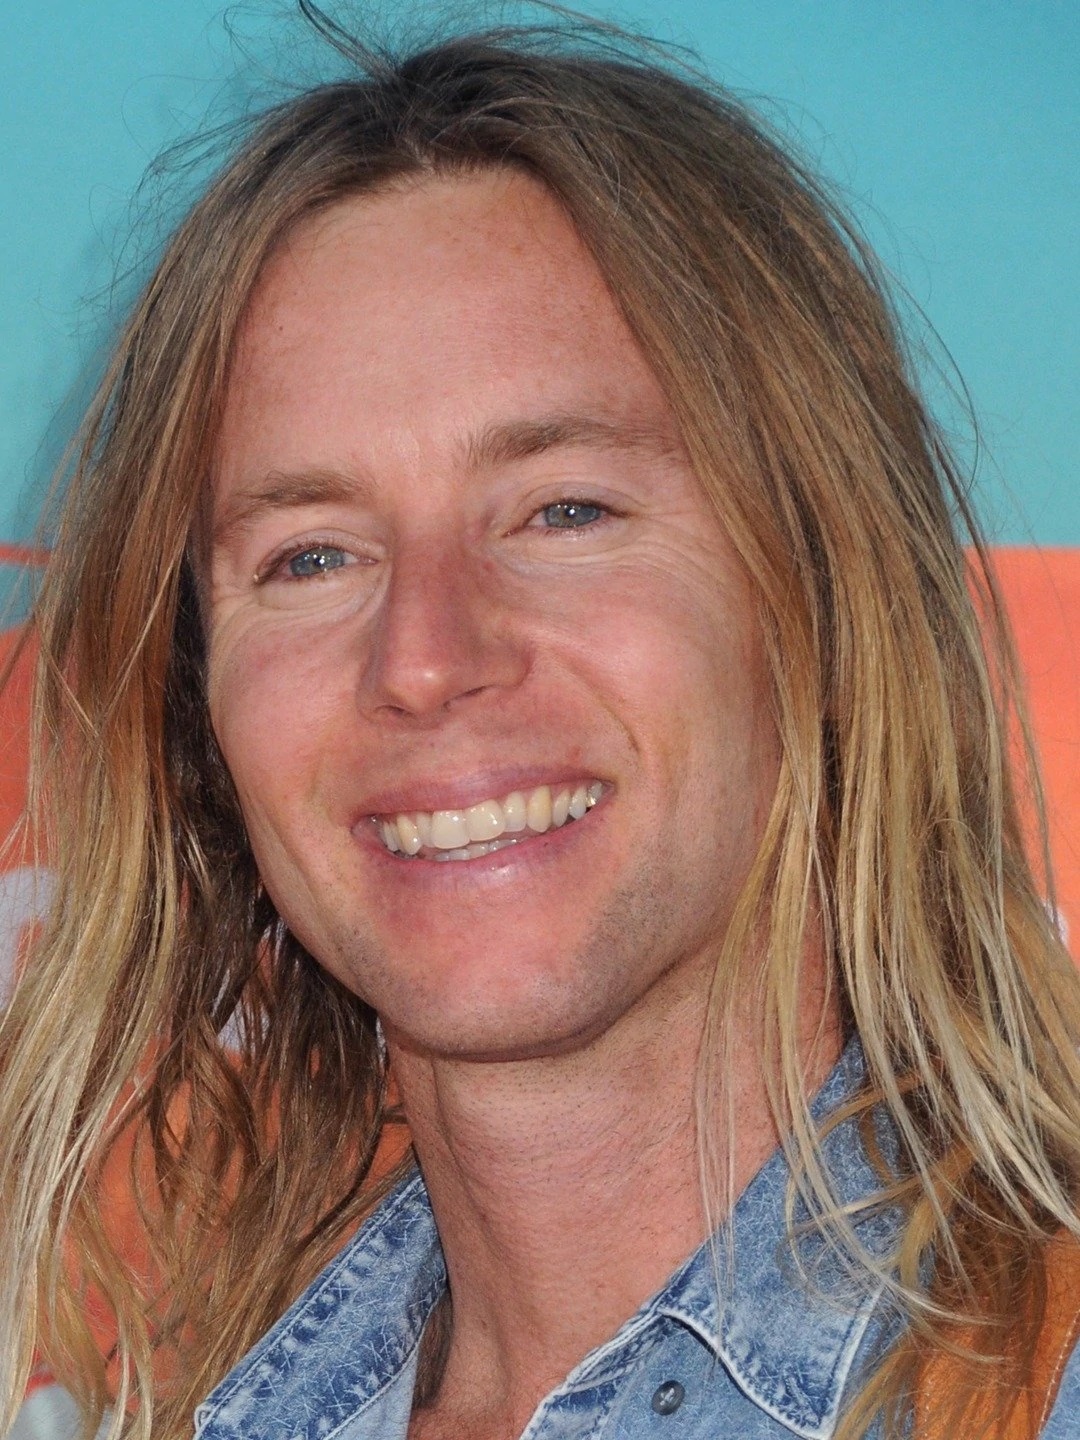 Greg Cipes, Star vs. the Forces of Evil Wiki